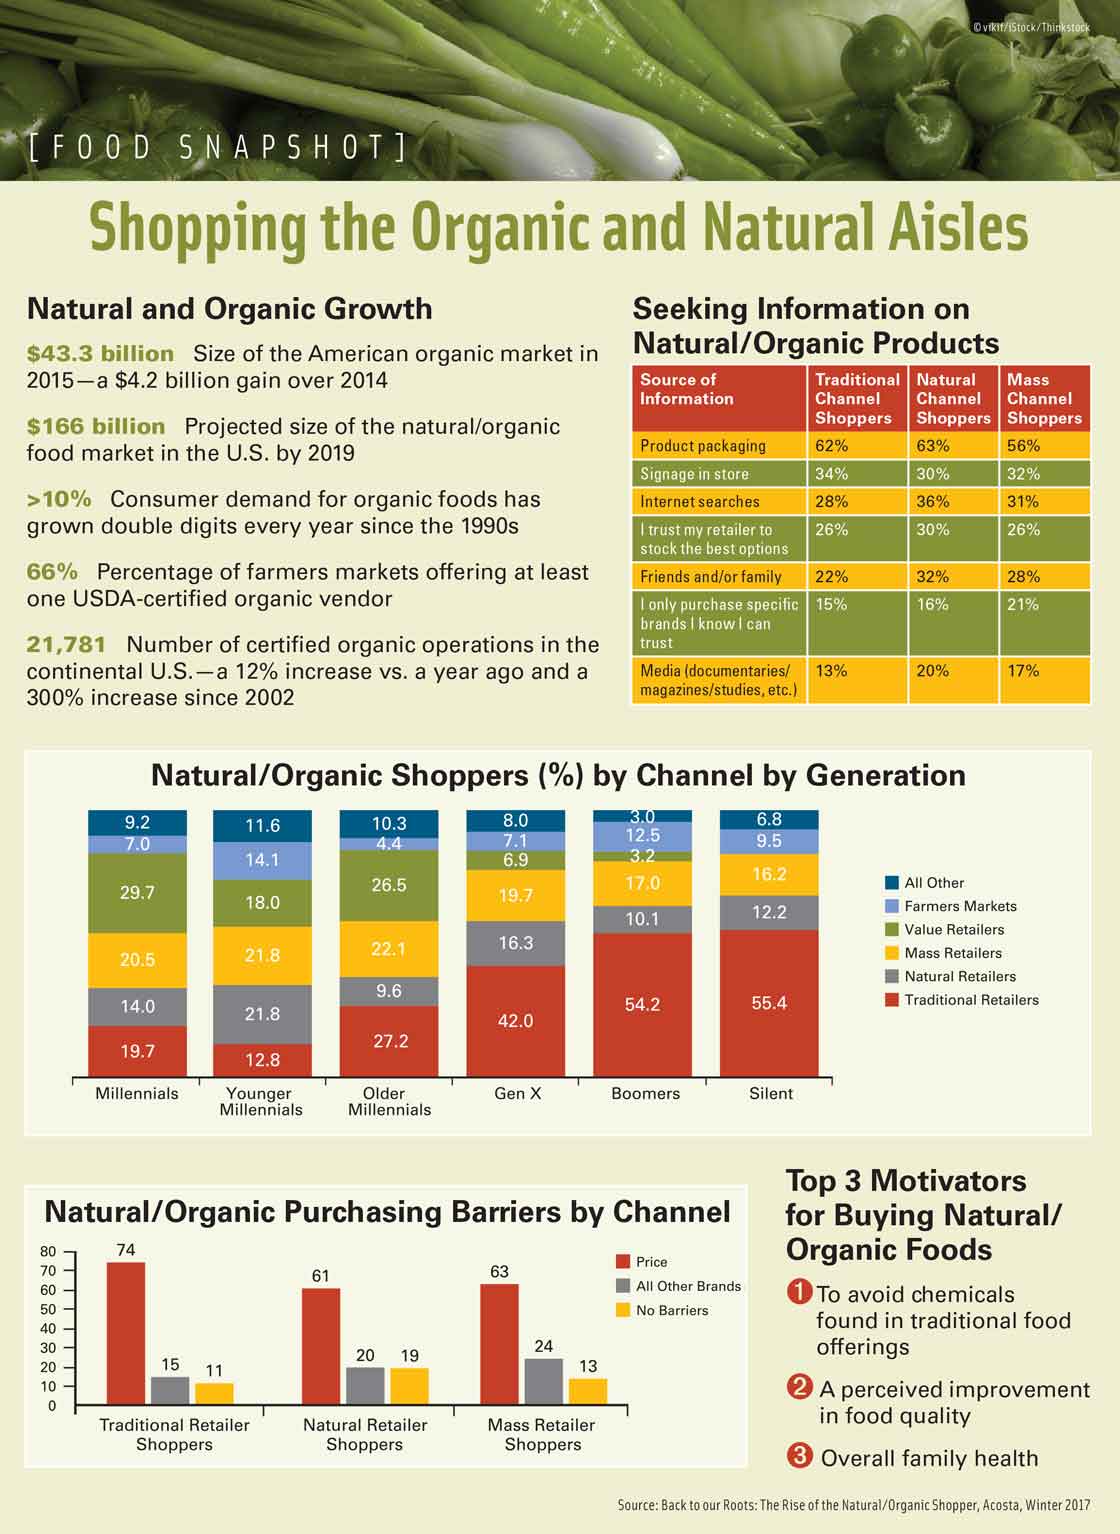 Shopping the Organic and Natural Aisles. Source: Back to our Roots: The Rise of the Natural/Organic Shopper, Acosta, Winter 2017